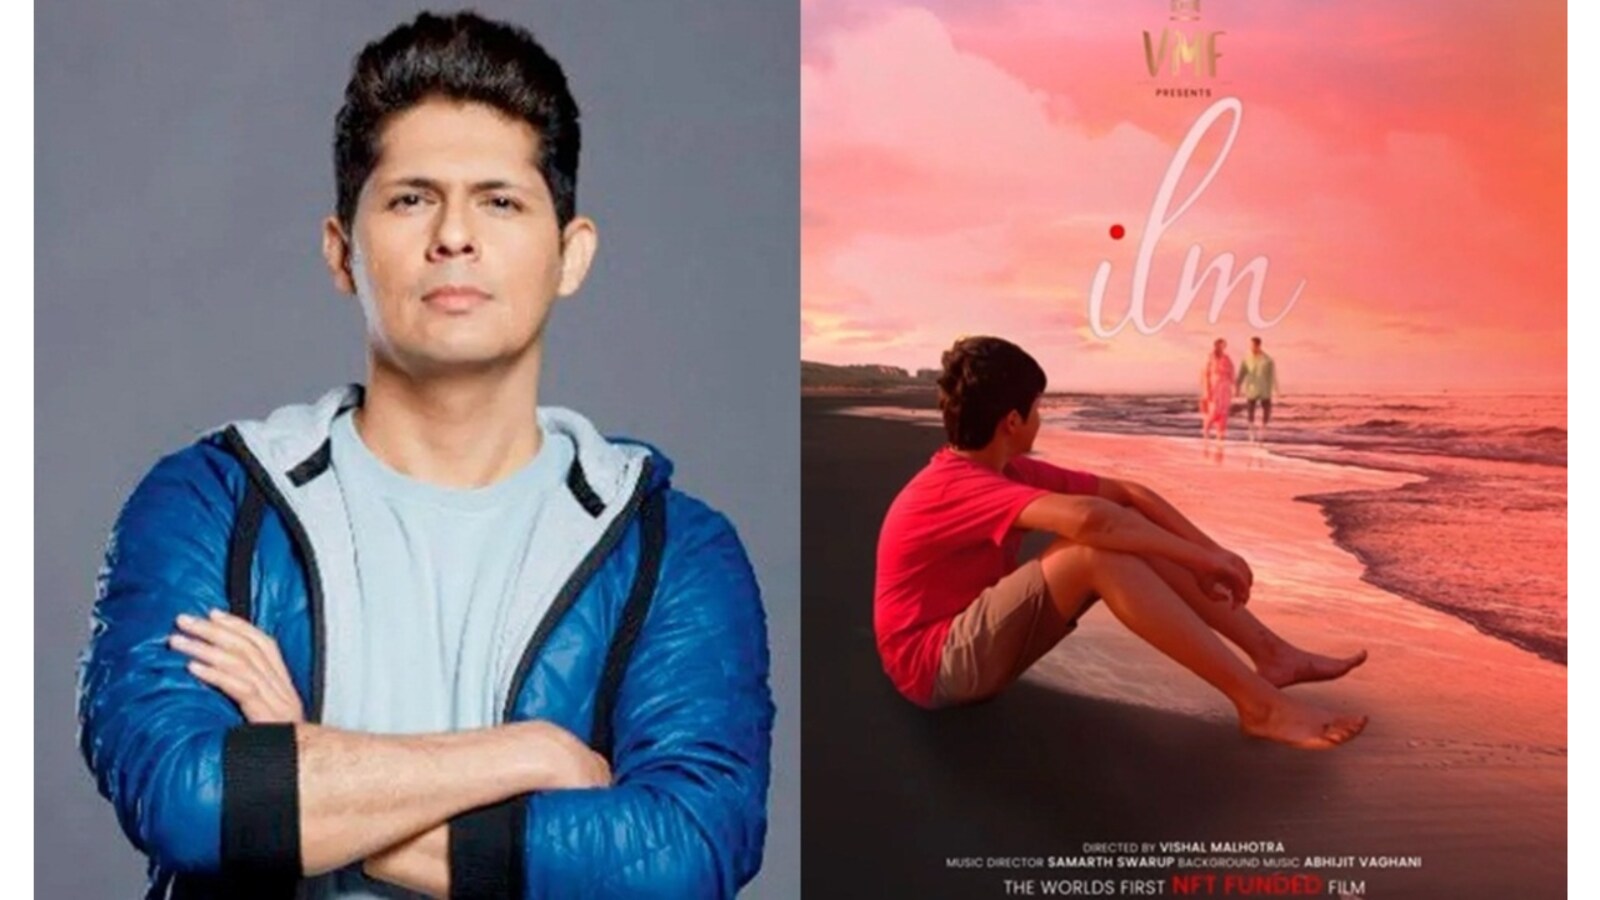 Actor Vishal Malhotra's directorial debut 'Ilm' is touted as ...